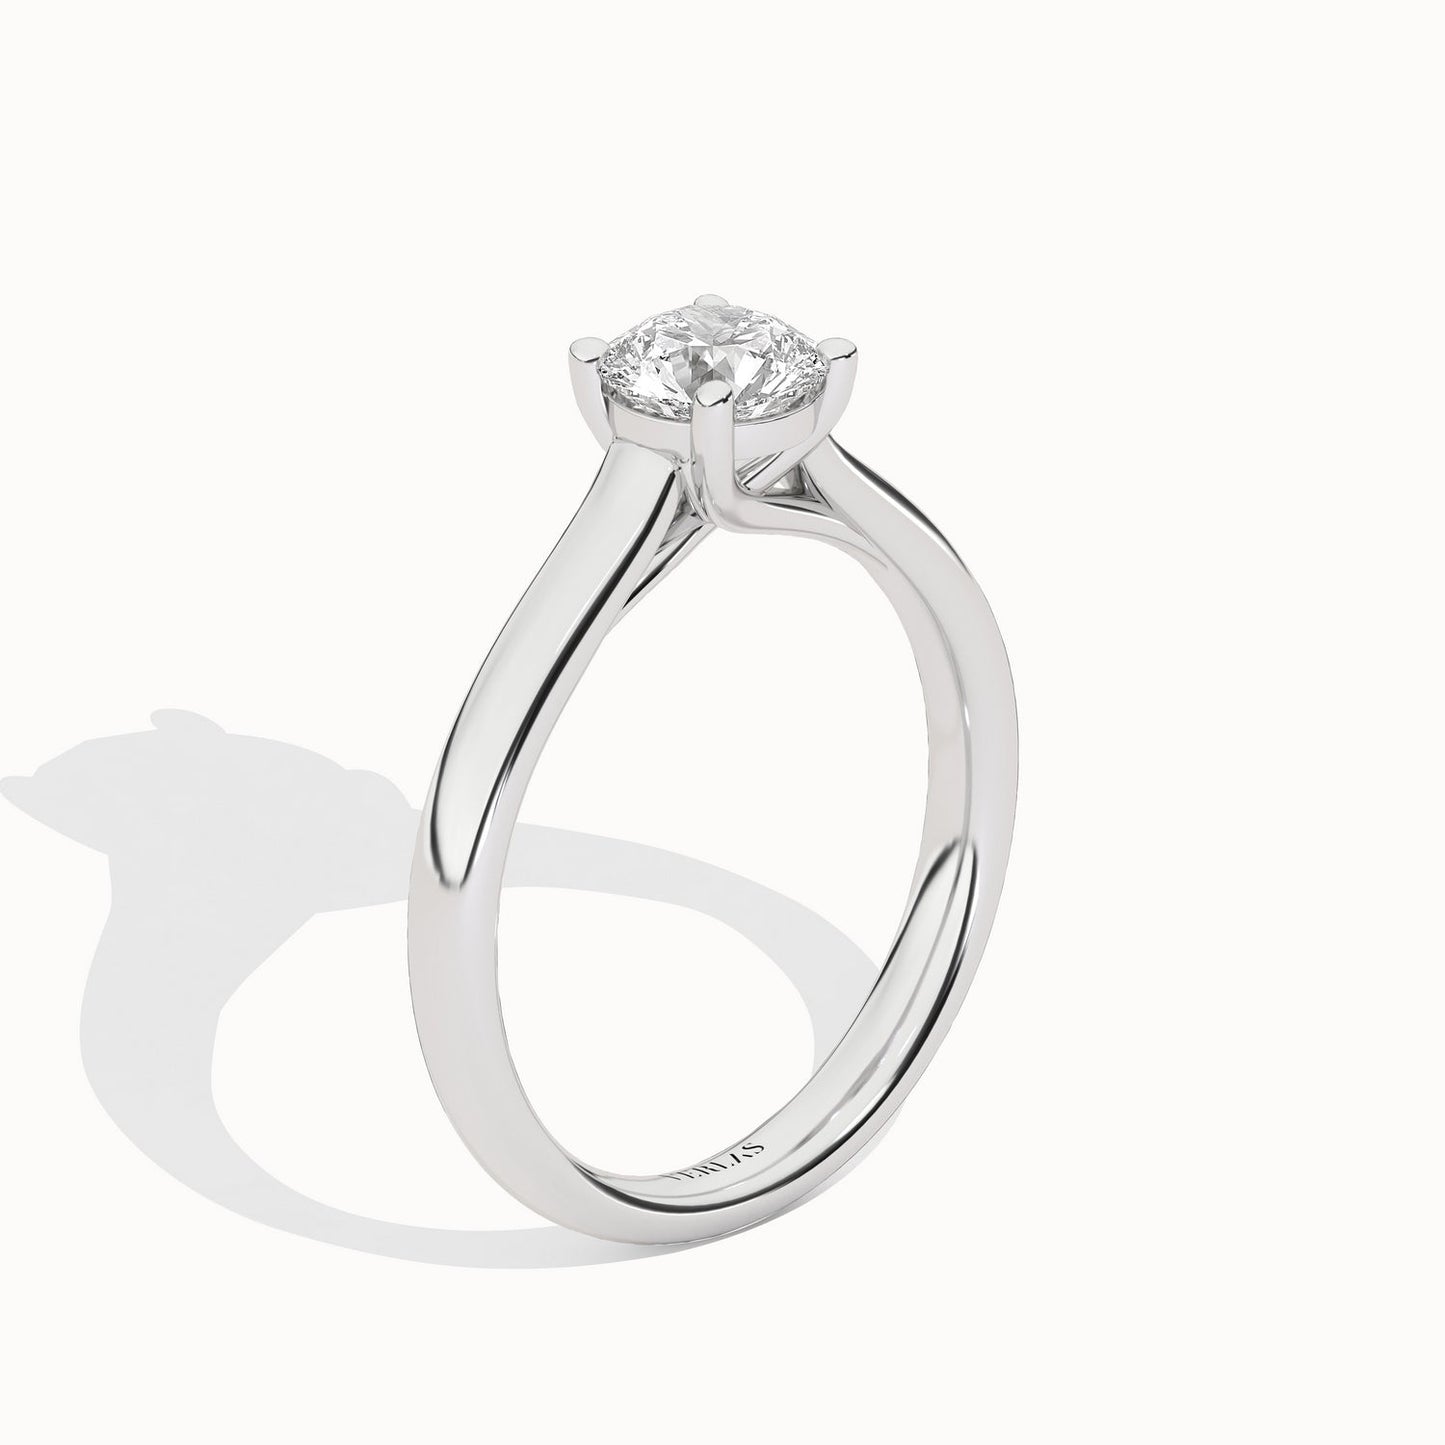 Timeless Round Ring_Product Angle_3/4Ct - 4